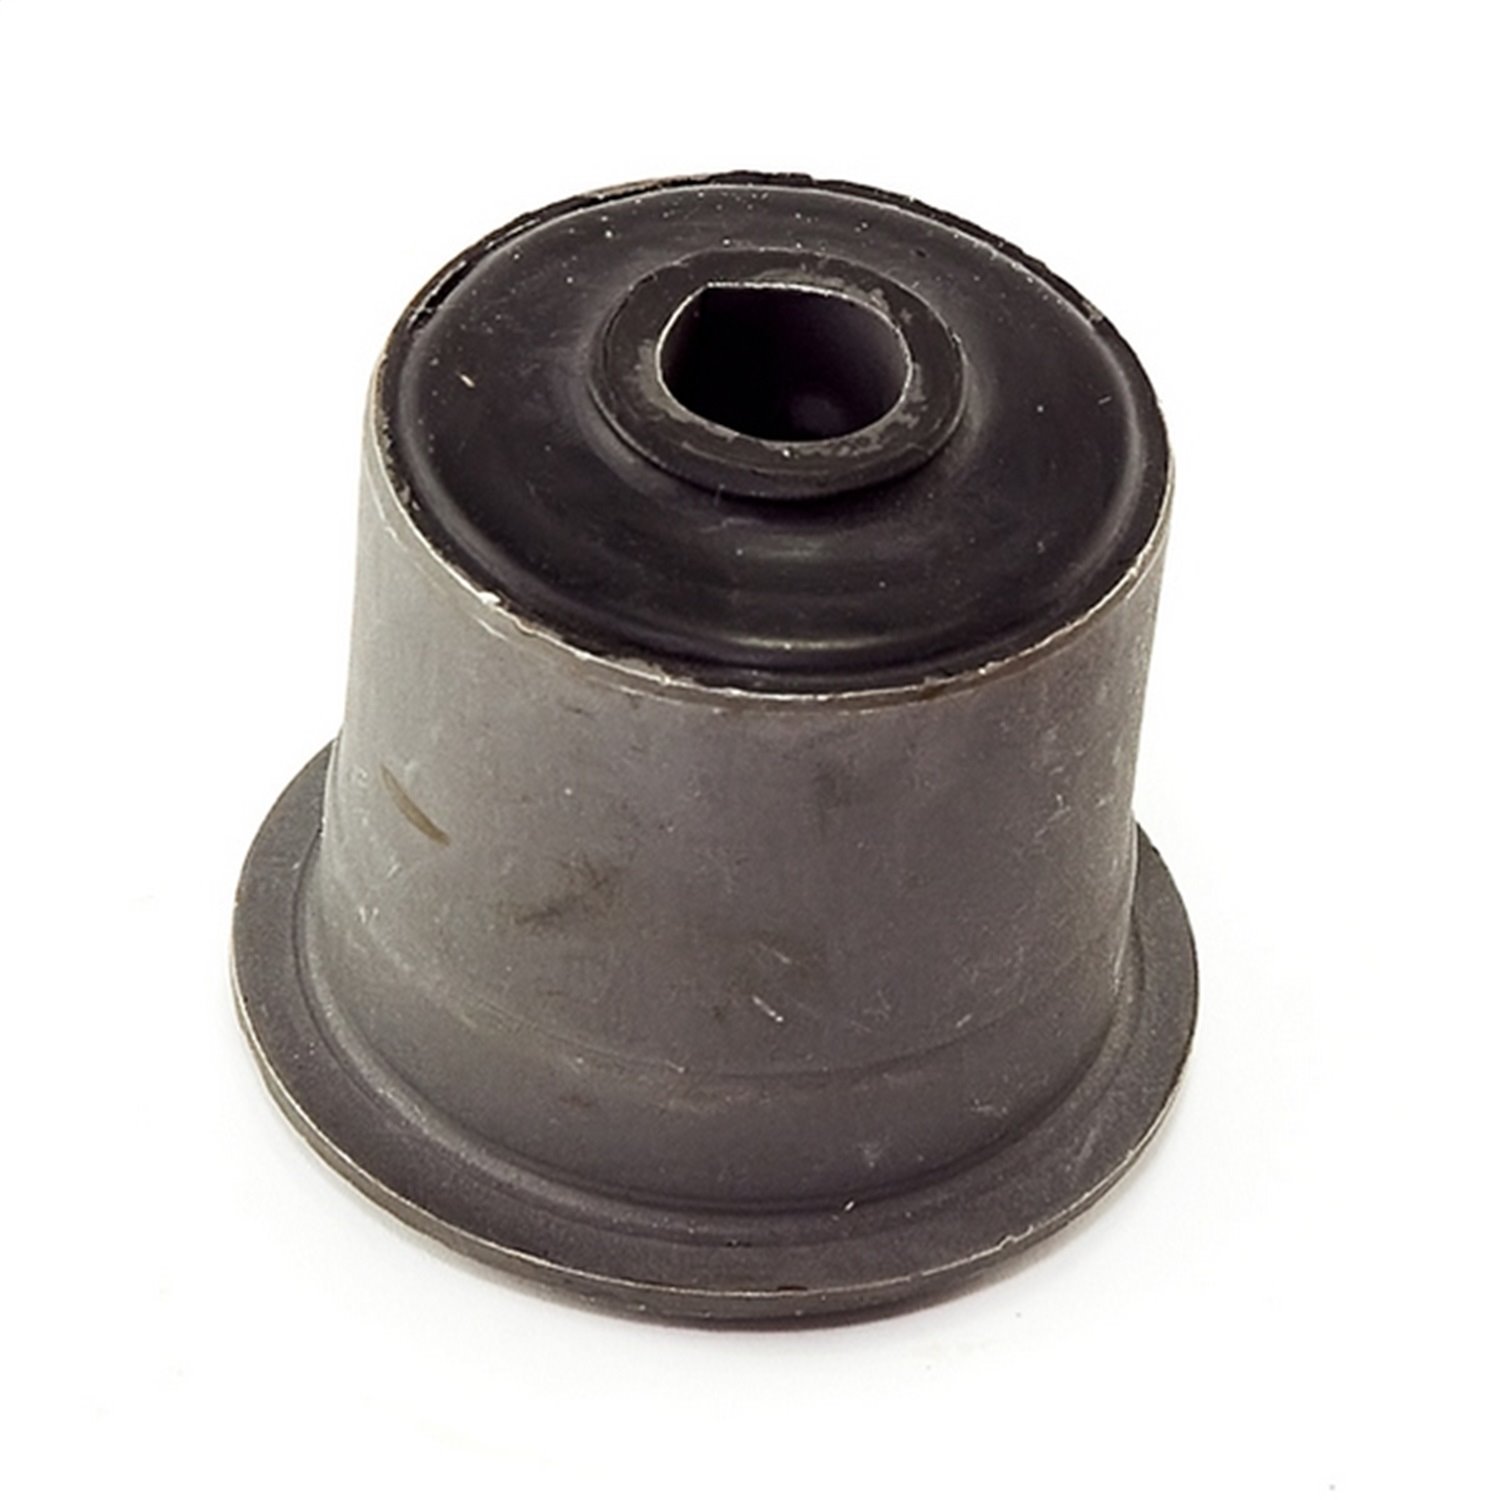 This upper control arm bushing from Omix-ADA fits the front or rear on 84-90 Jeep Cherokee XJ .